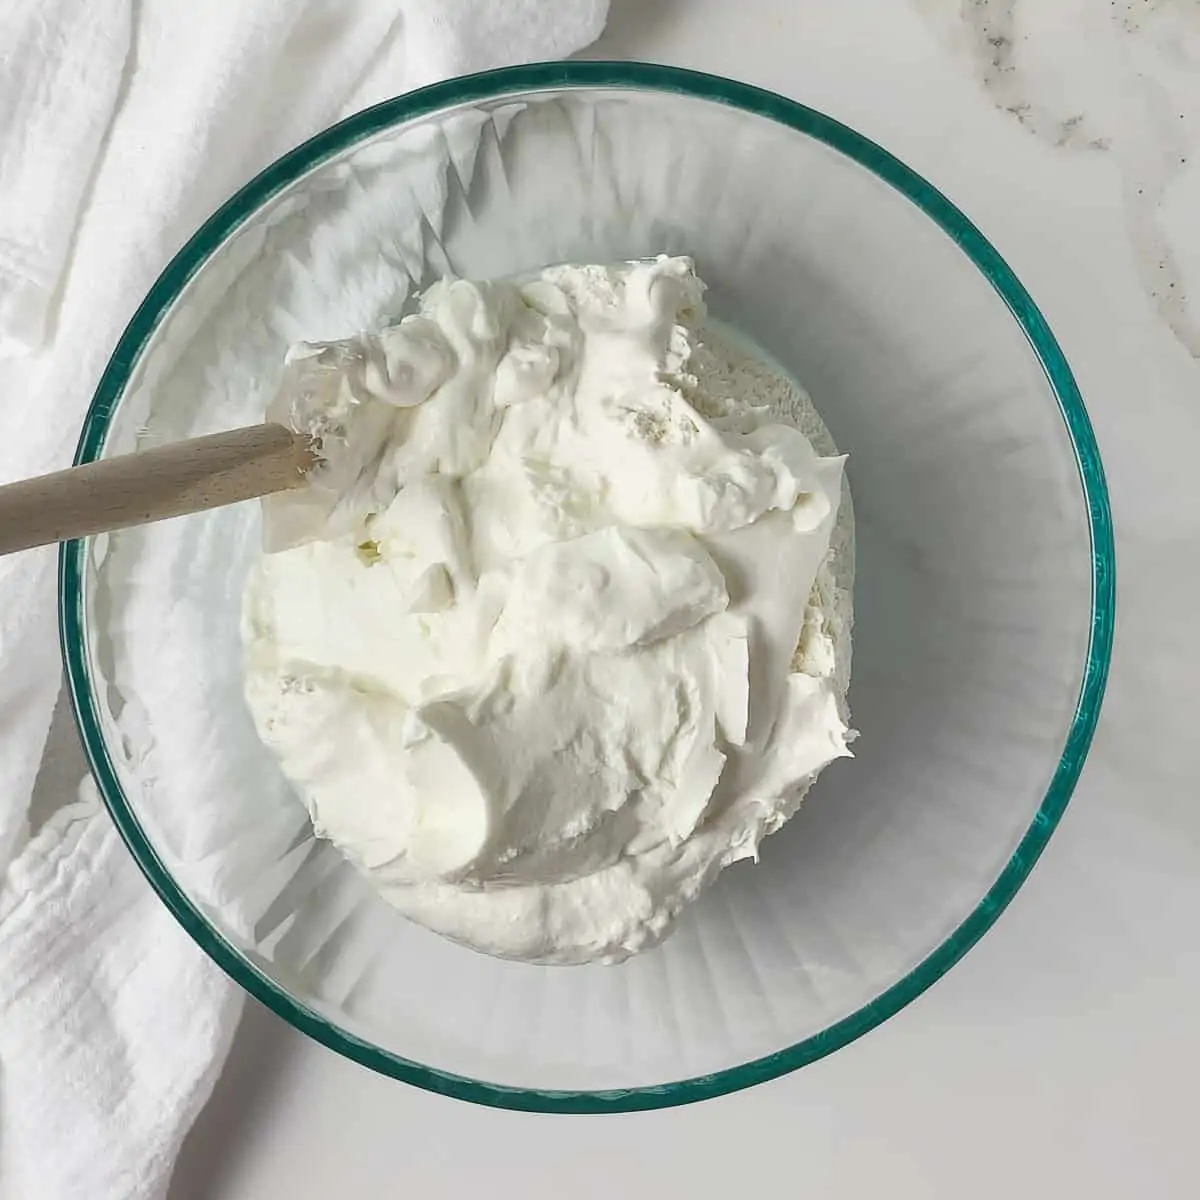 yogurt and cool whip in a glass mixing bowl